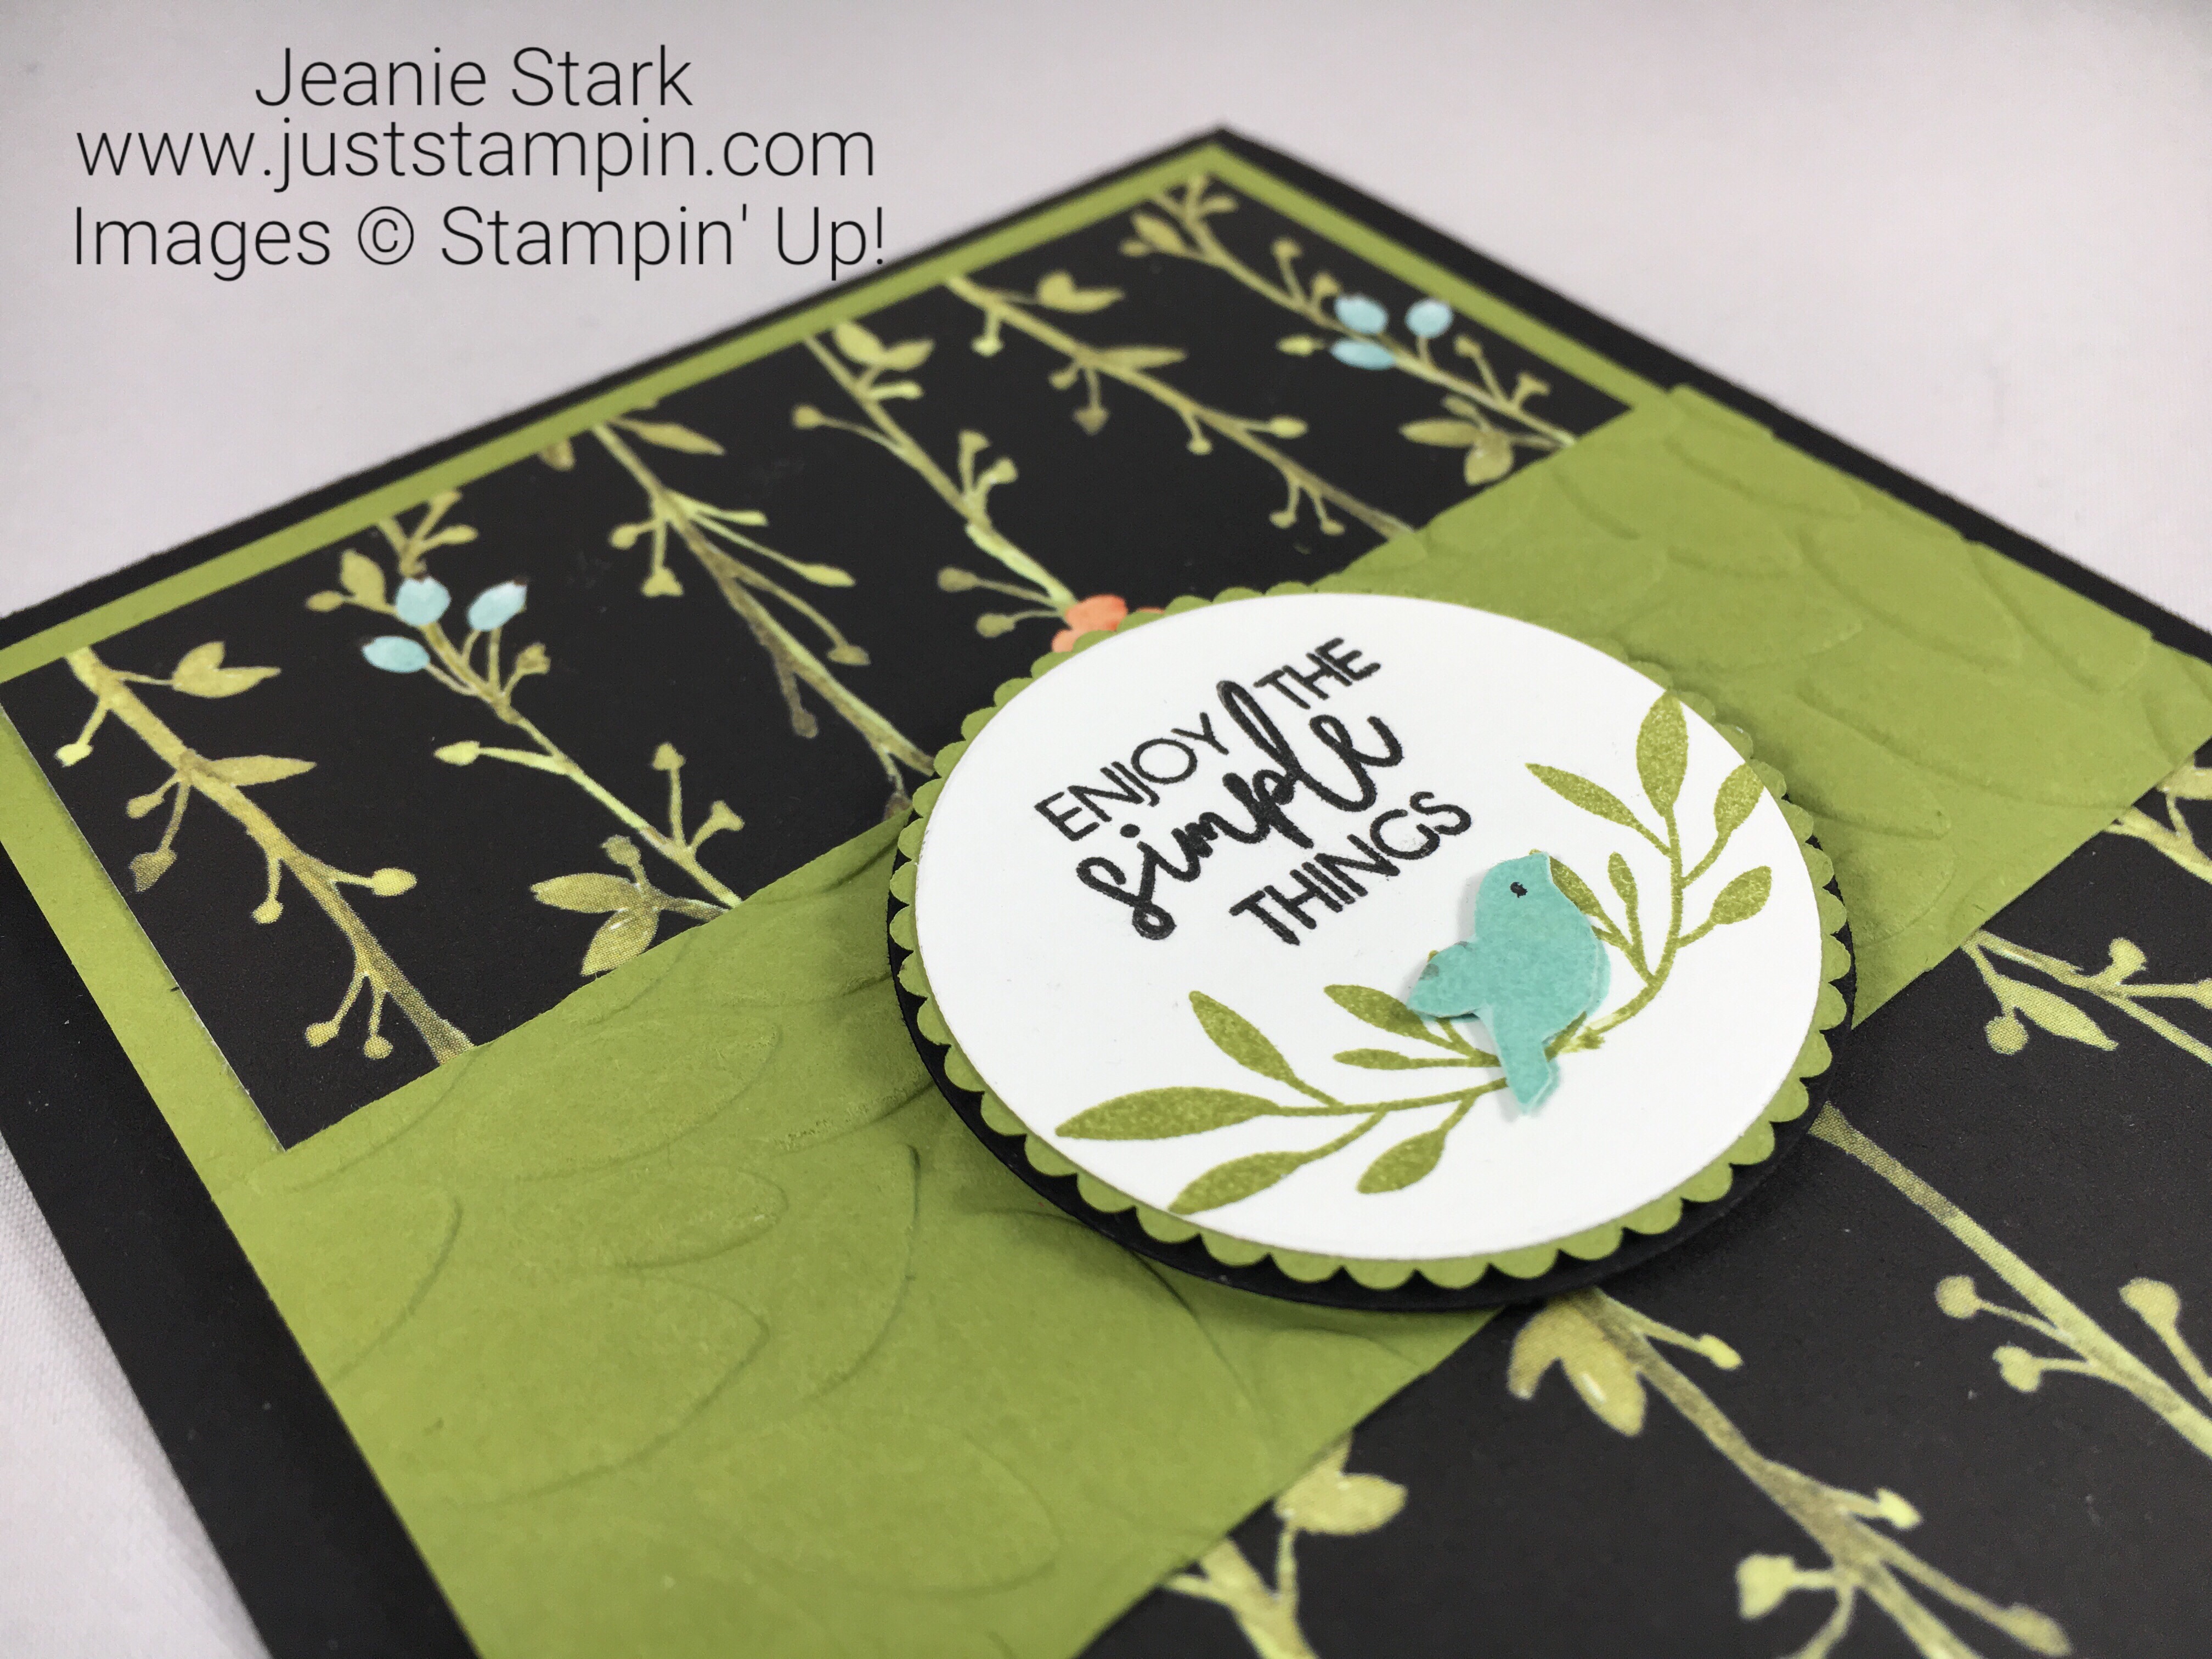 Stampin Up Ya You inspirational all occasion card idea - Jeanie Stark StampinUp